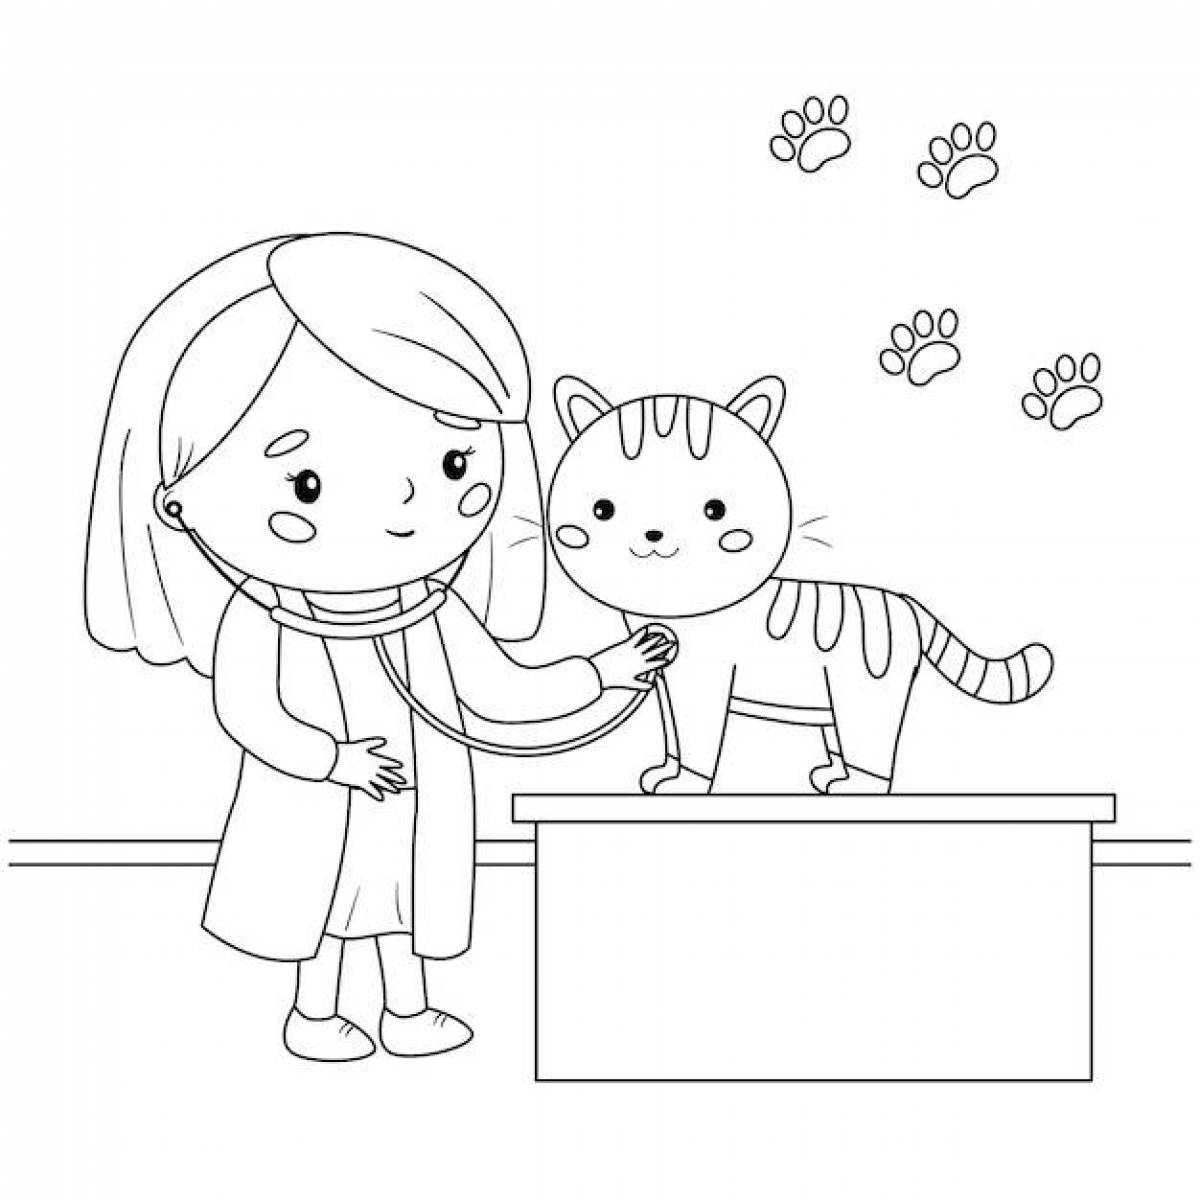 Vet coloring page